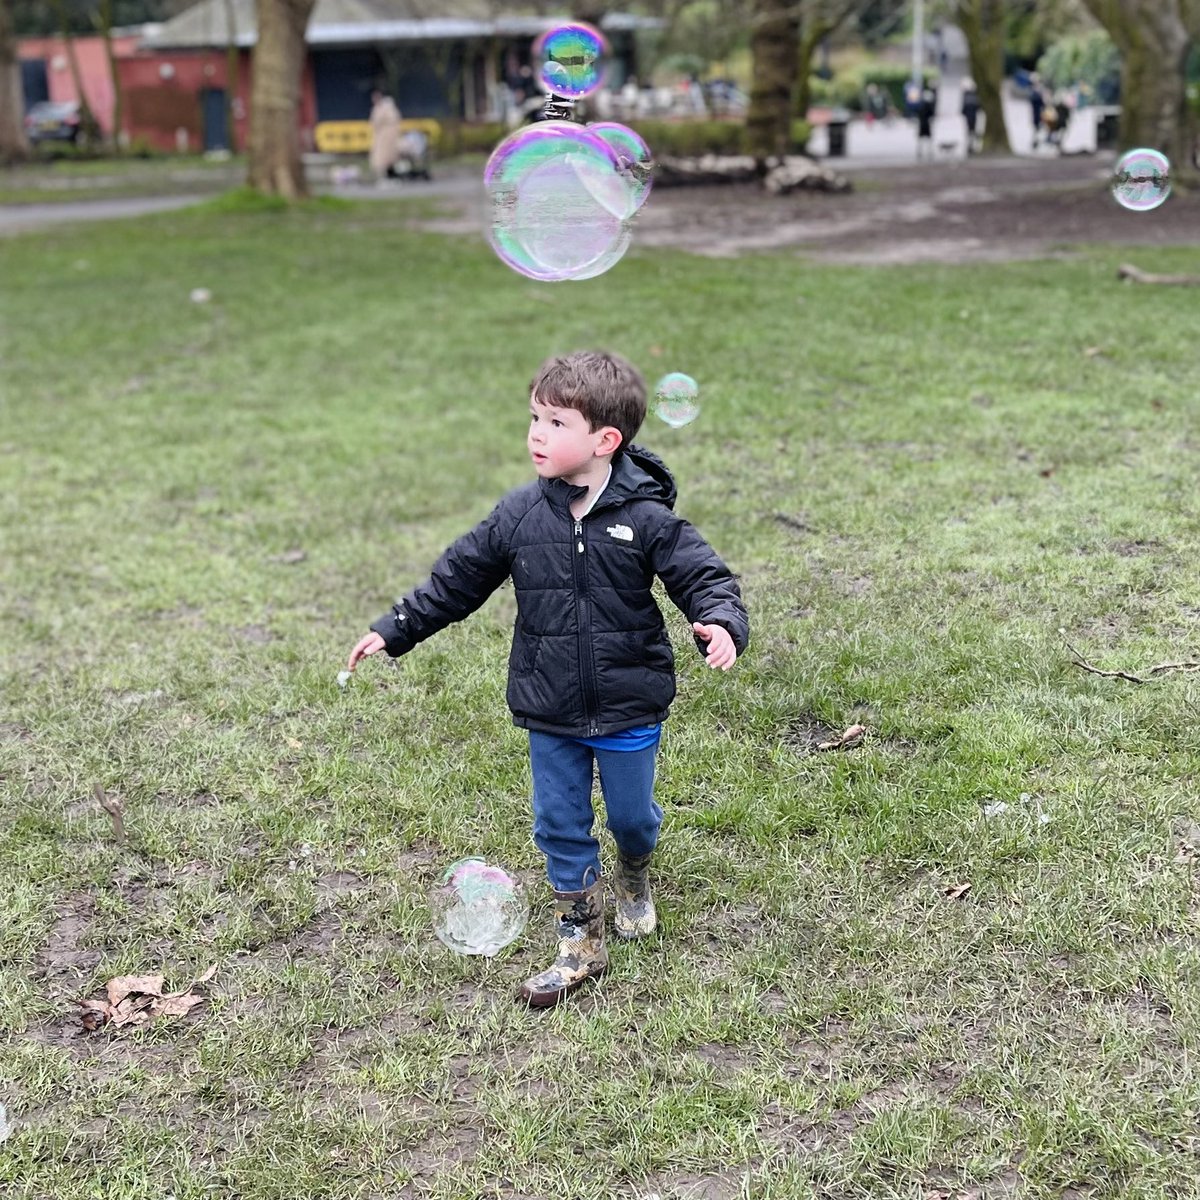 Generosity Rocks. This kind & generous young man was making massive bubbles in the Park. Wasn’t asking for anything. Wasn’t expecting anything in return, but 30-40 kids having fun, making up games & parents chatting. Generosity creates Generosity ❤️ #InfectiousGenerosity